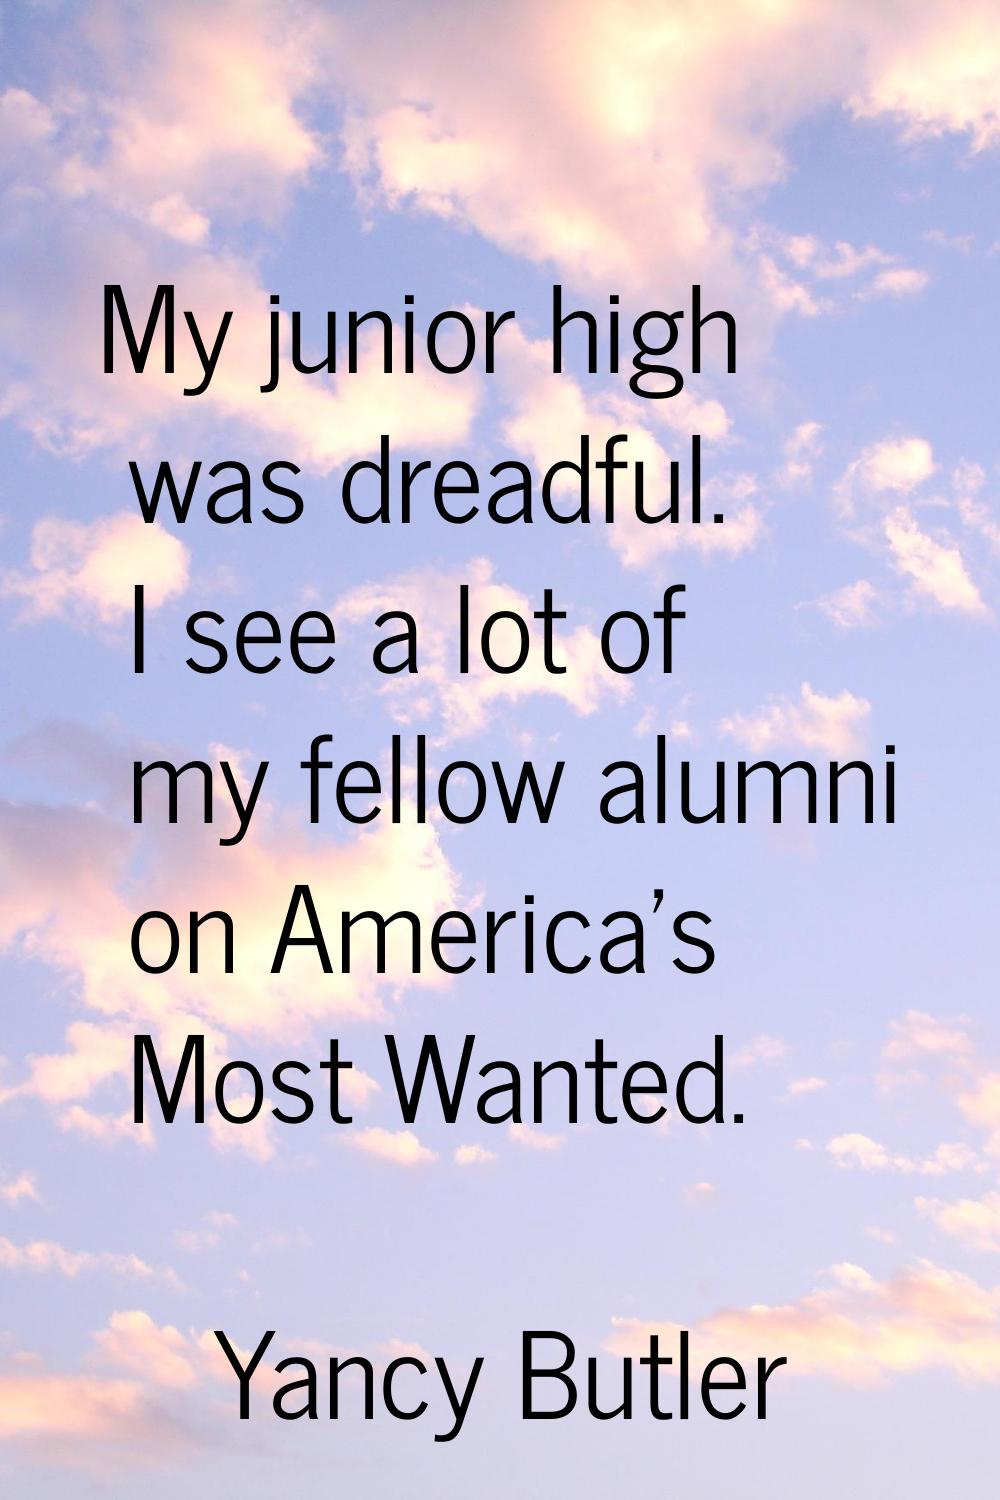 My junior high was dreadful. I see a lot of my fellow alumni on America's Most Wanted.